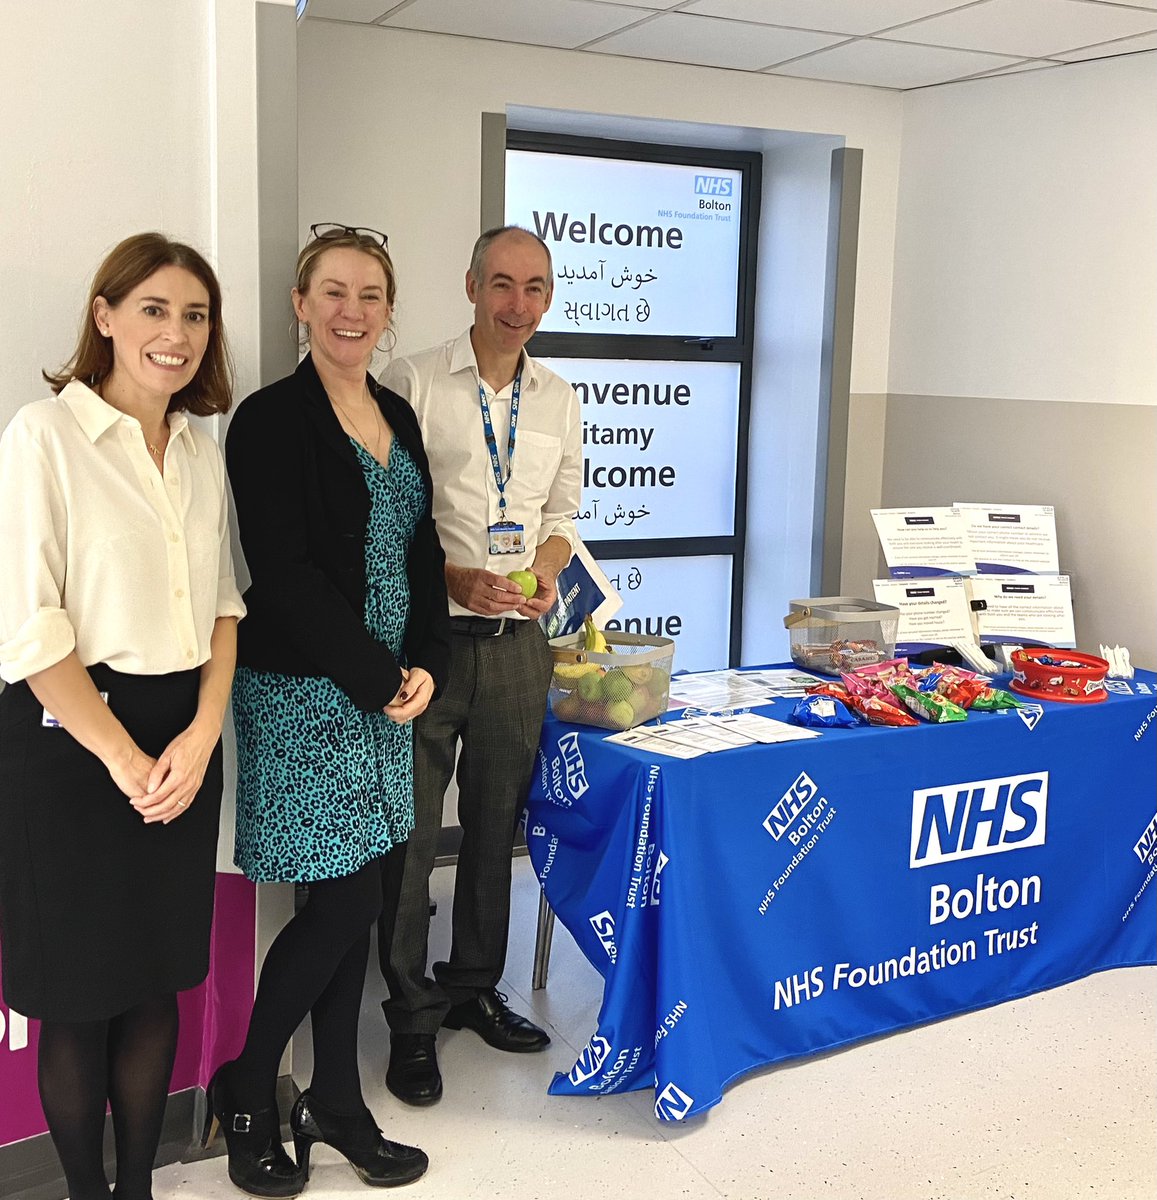 Thanks for stopping by our #KnowYourPatient learning week stand during your busy day, Francis Andrews & @walkerat42 . We will be back outside the restaurant tomorrow morning with @JulieRyanData talking about the importance of data quality in patient records #KYP2022 @boltonnhsft